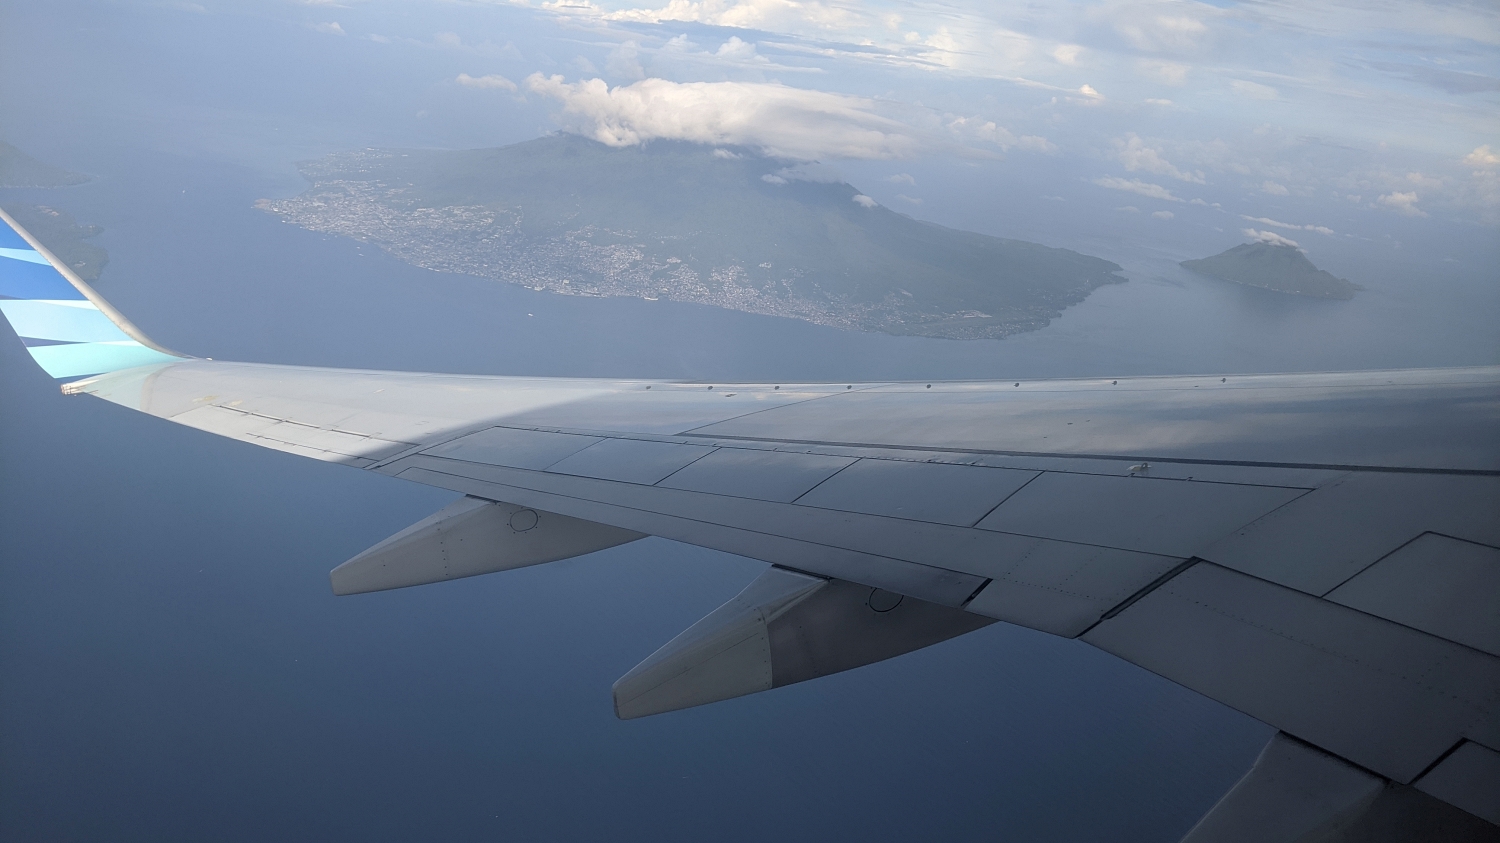 Airplane wing framing a volcanic island with a dense city at the base